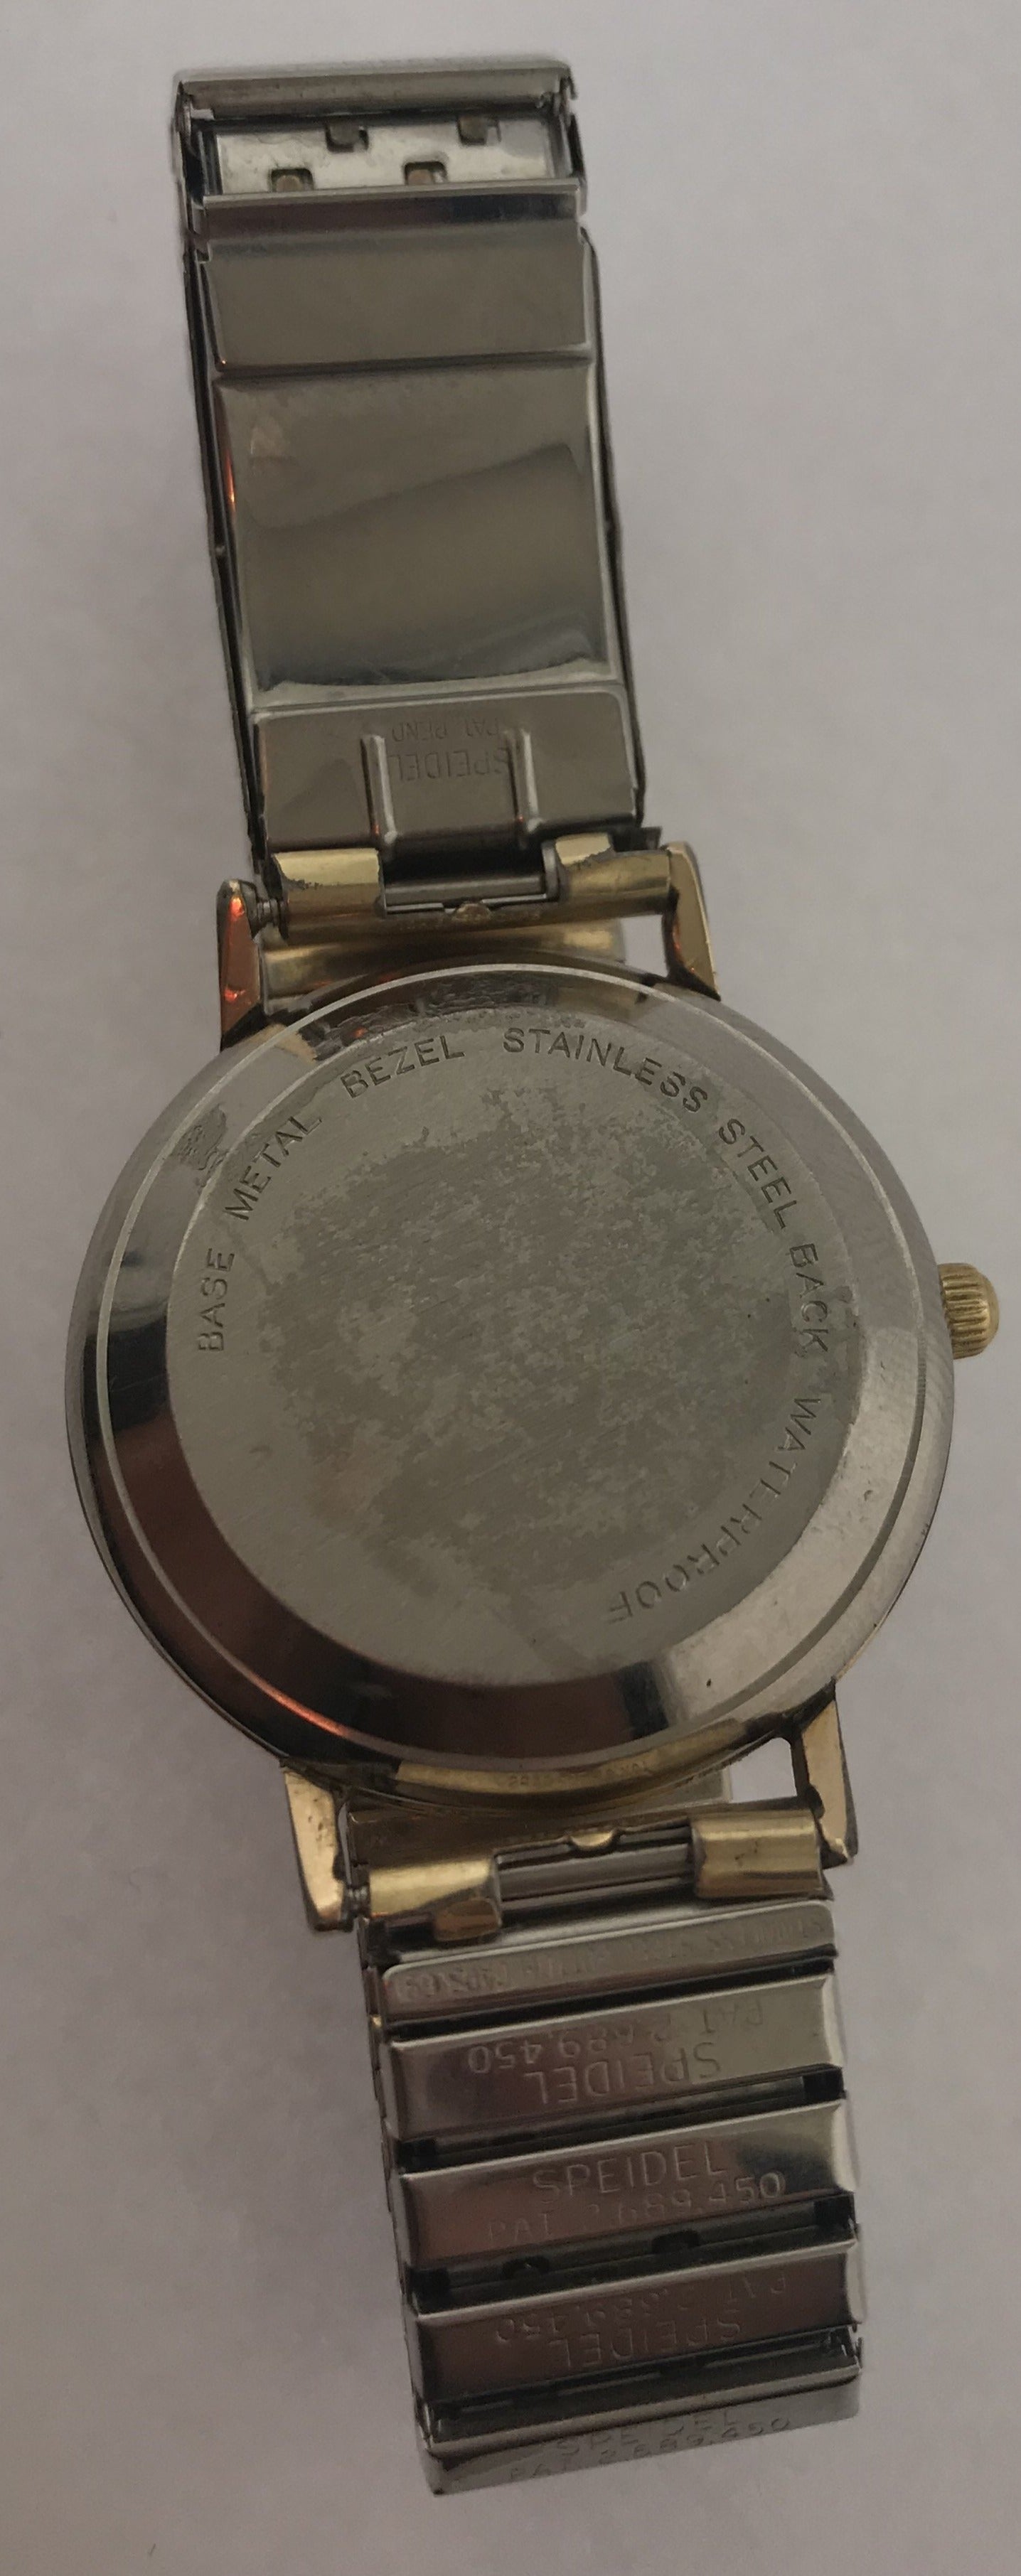 Mens Vintage Lord Elgin Watch With Vintage Rotating Calendar Band - Le Vive Jewelry in Riverside